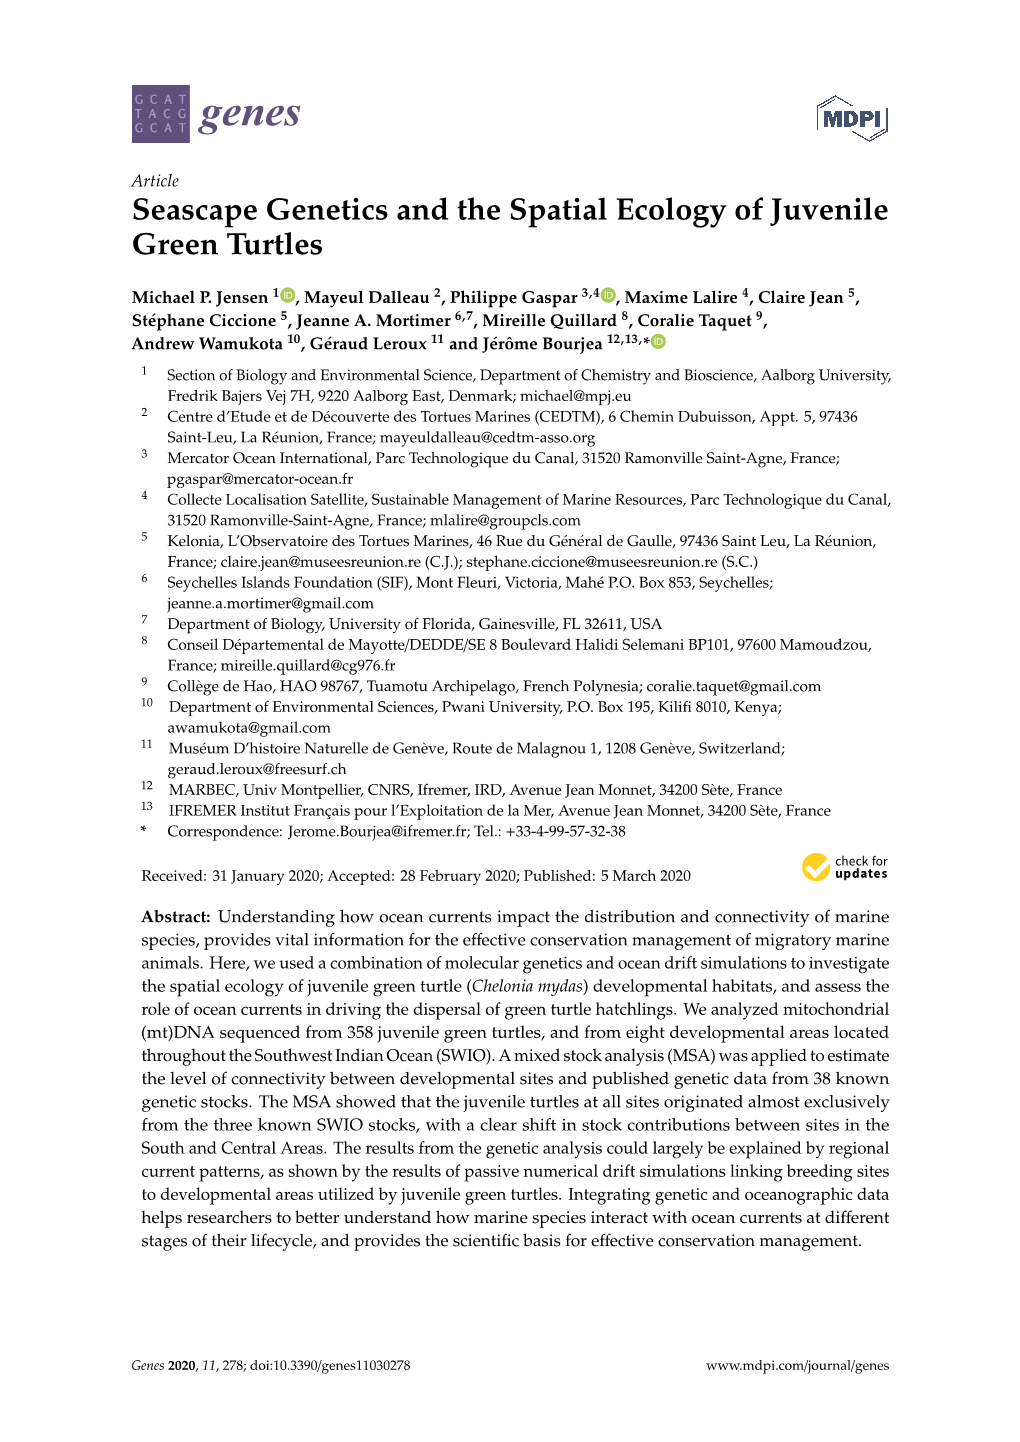 Seascape Genetics and the Spatial Ecology of Juvenile Green Turtles